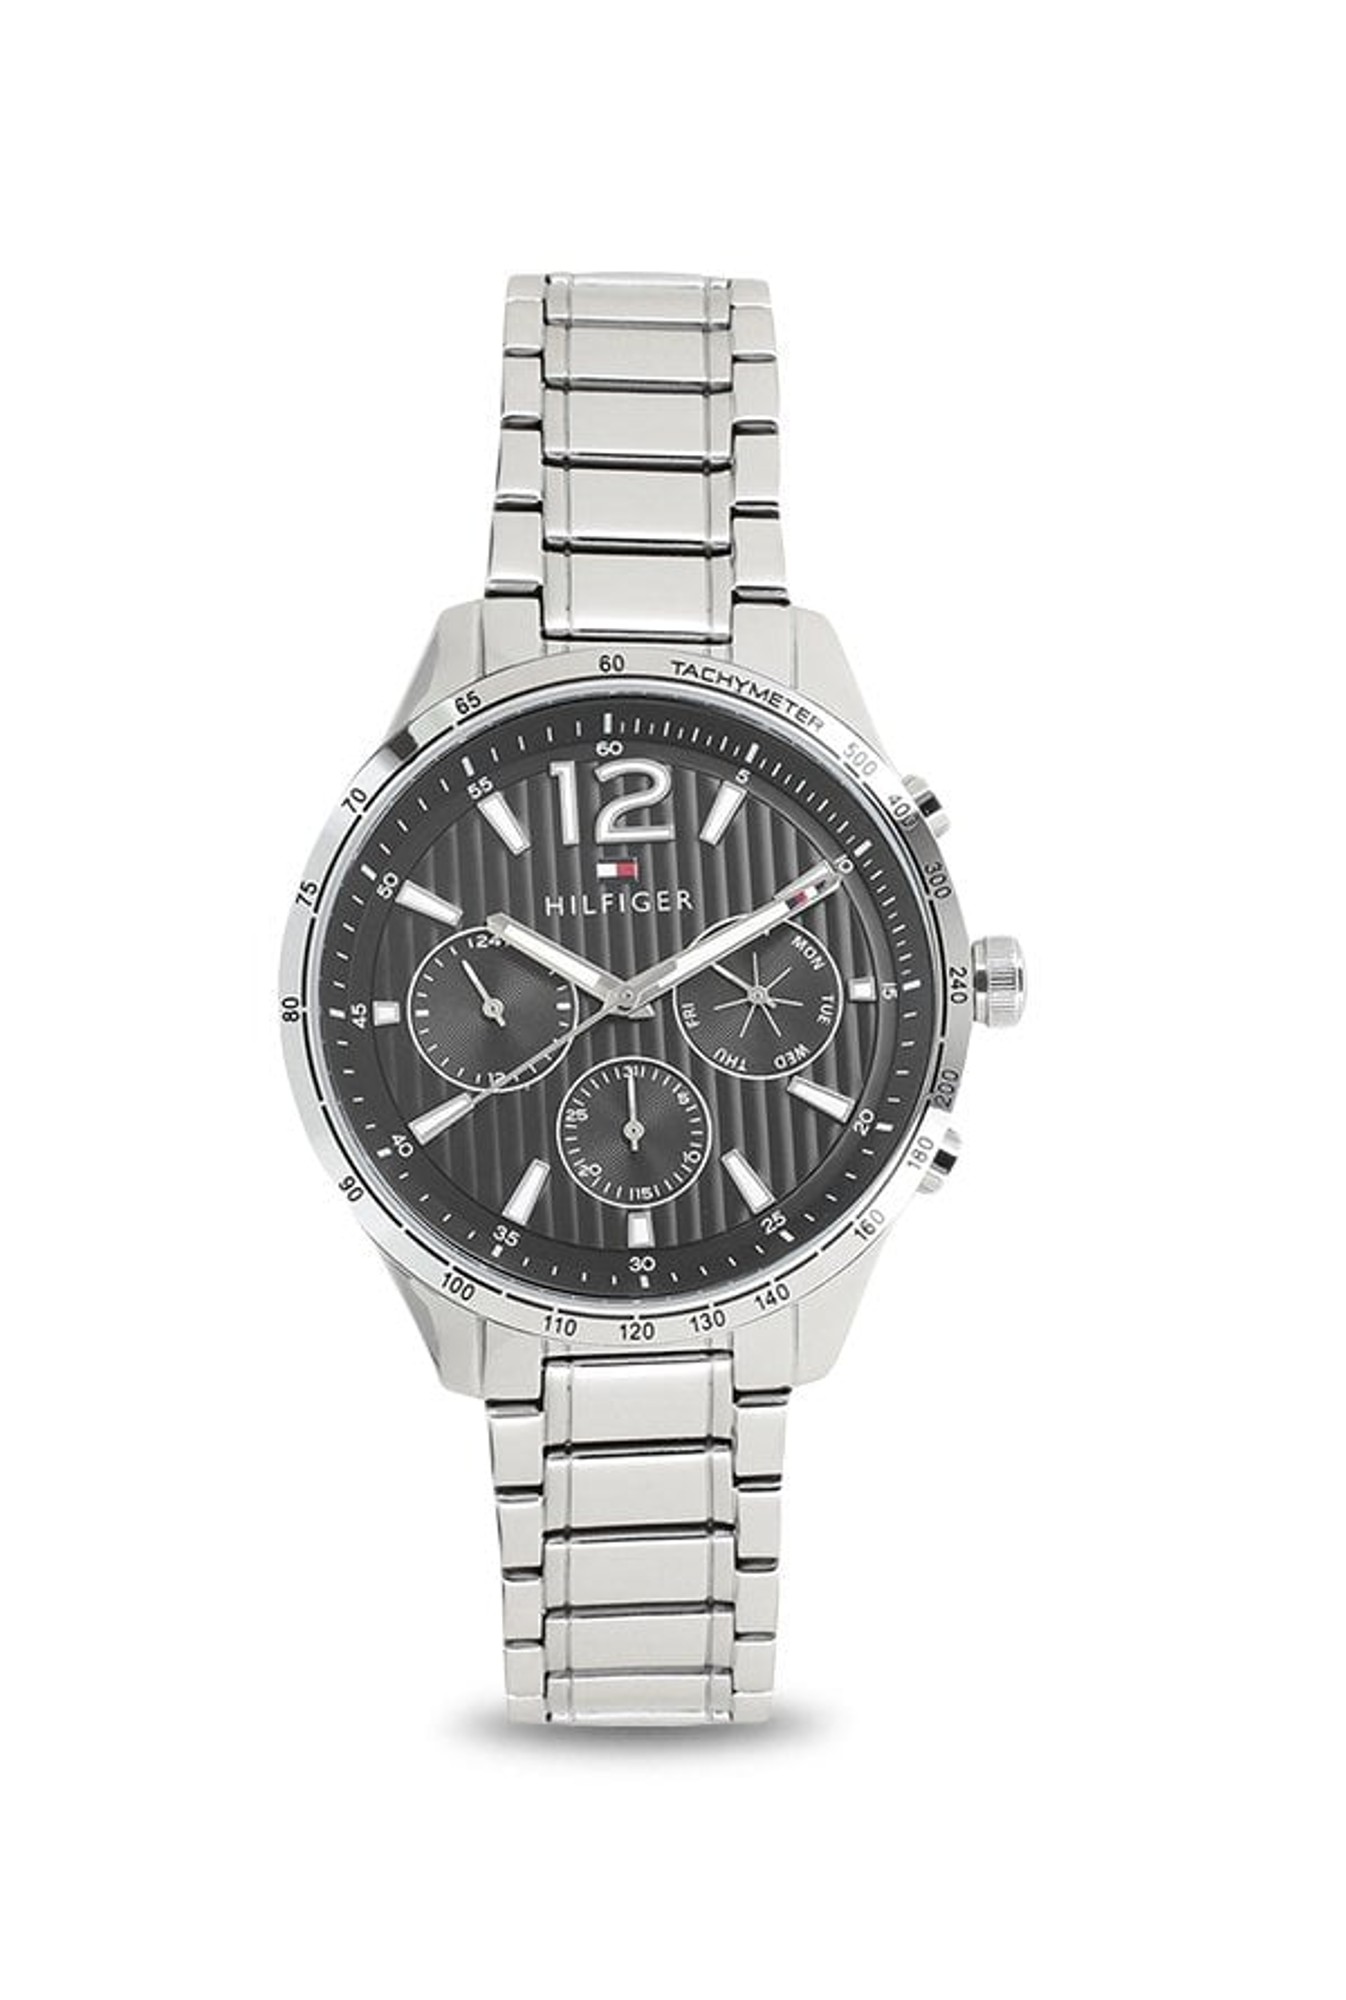 Geometry Departure The owner Buy Tommy Hilfiger TH1791469 Analog Watch for Men at Best Price @ Tata CLiQ